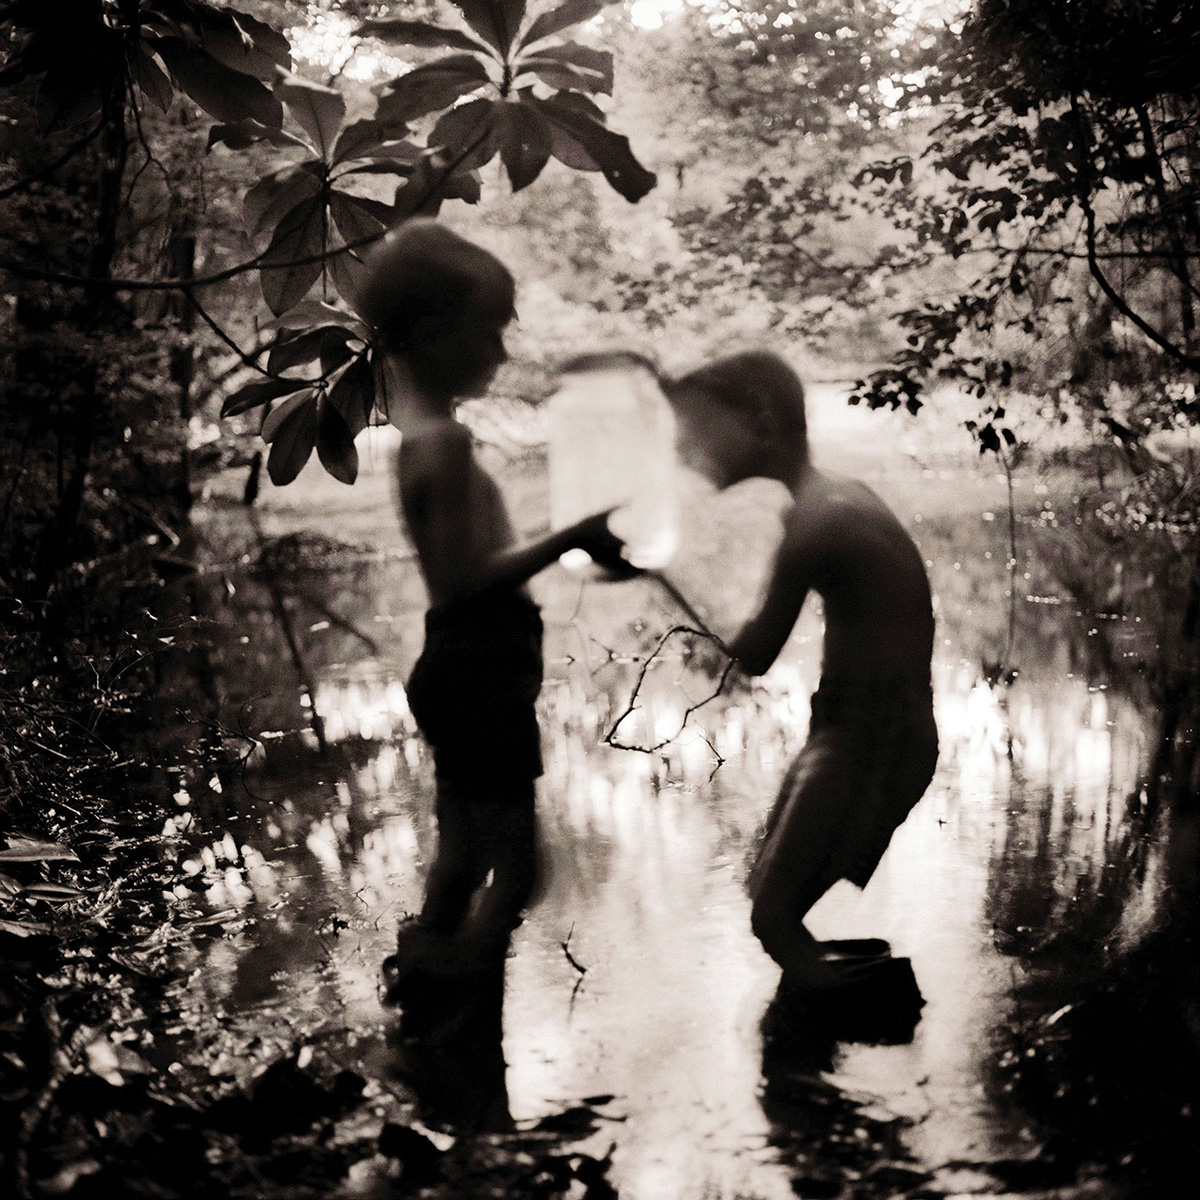 Two boys stand in a swamp holding a large jar of fireflies